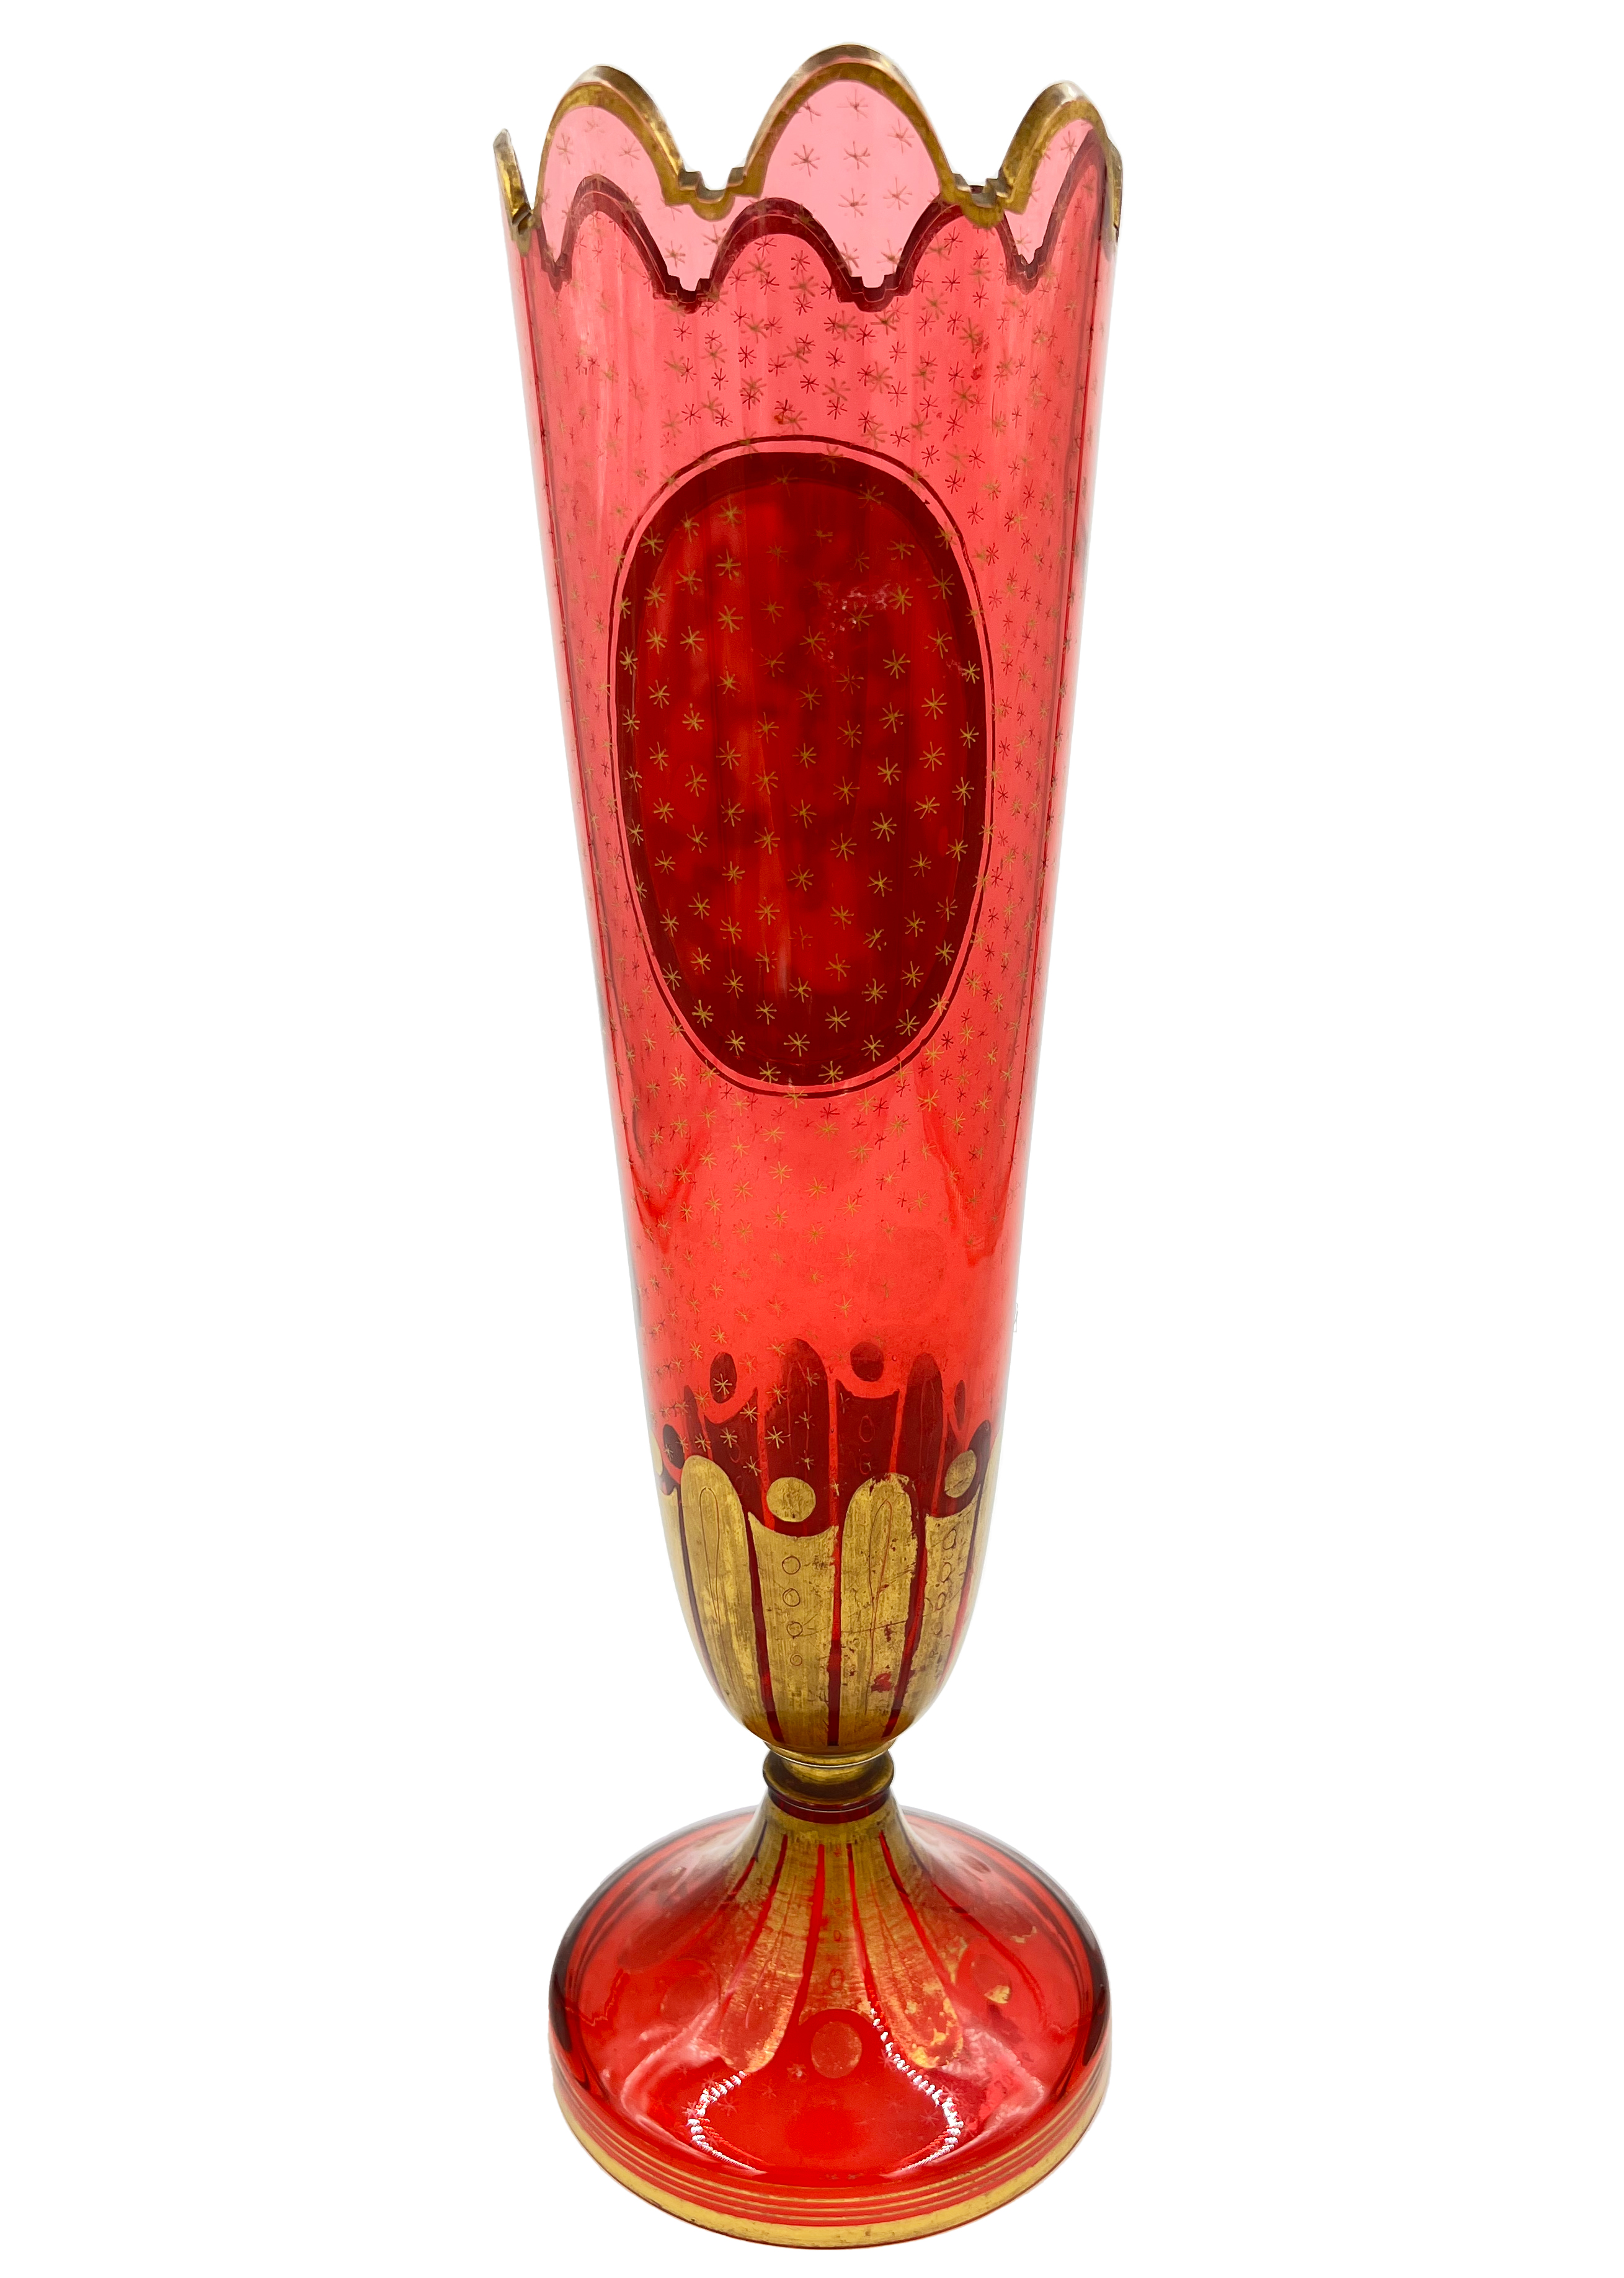 ROYAL RUBY – LARGE 19TH CENTURY BOHEMIAN GLASS VASE WITH GOLD GILDING - Image 2 of 3